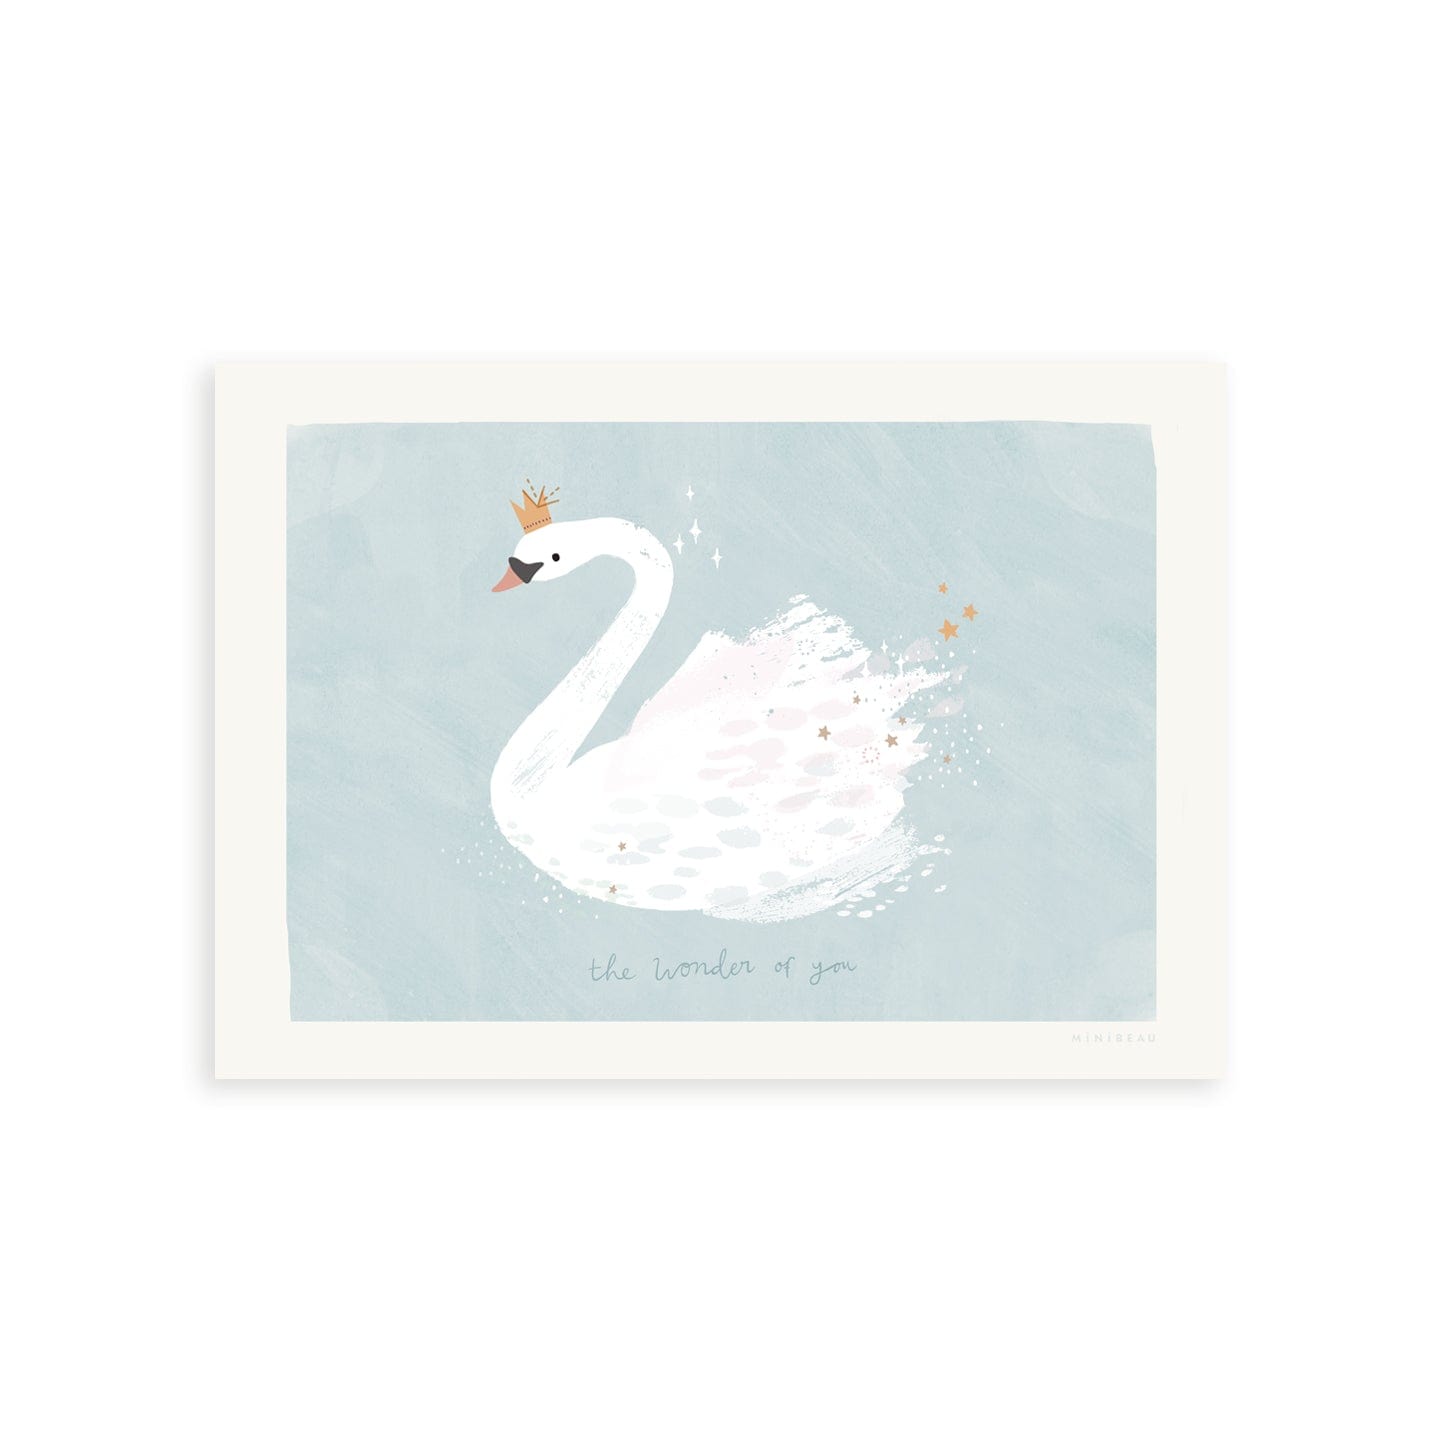 Our The Wonder of You art print features a swan on a textured light blue background (lake). The swan is wearinga gold sparkling crown and there are stars being left behind the swan as it swims in gold and white. The wonder of you is written in handwriting in a slightly darker blue underneath the swan. The art print has a white border.